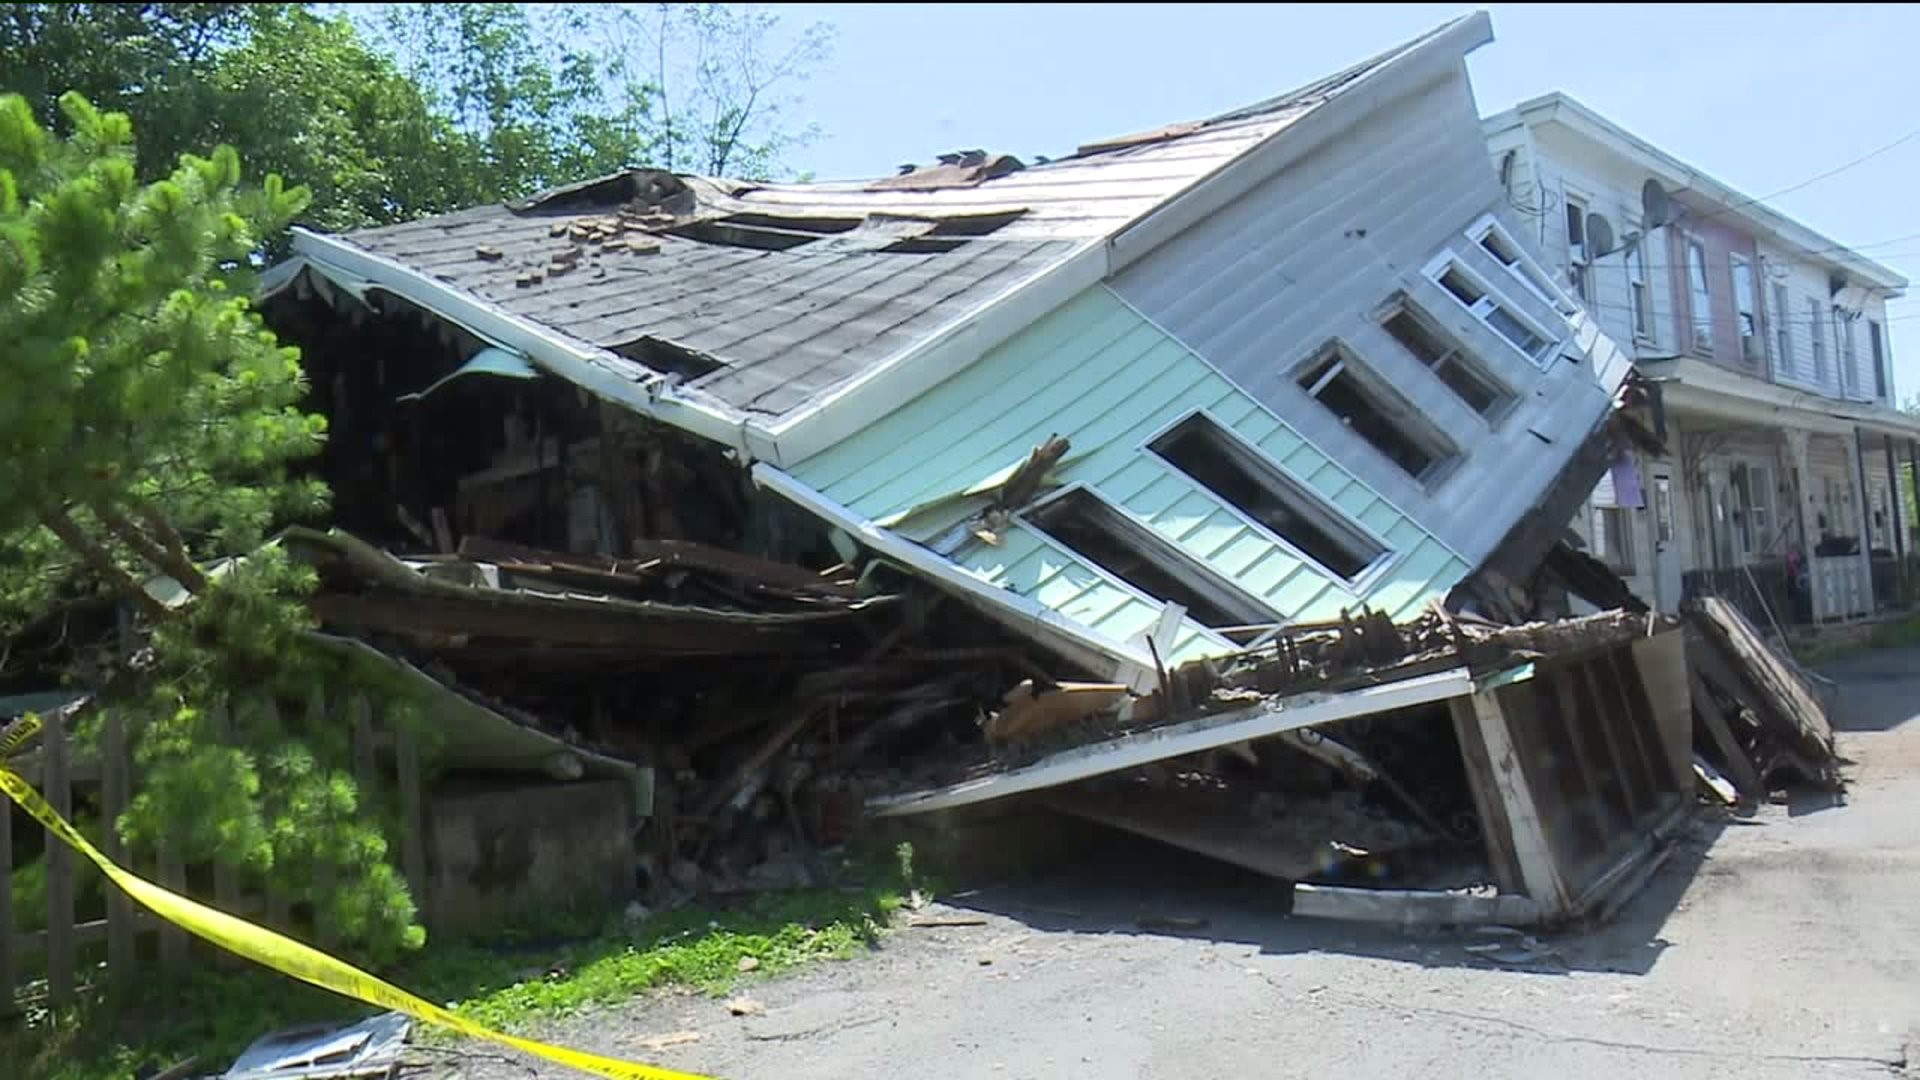 Row Homes to Rubble in Shenandoah